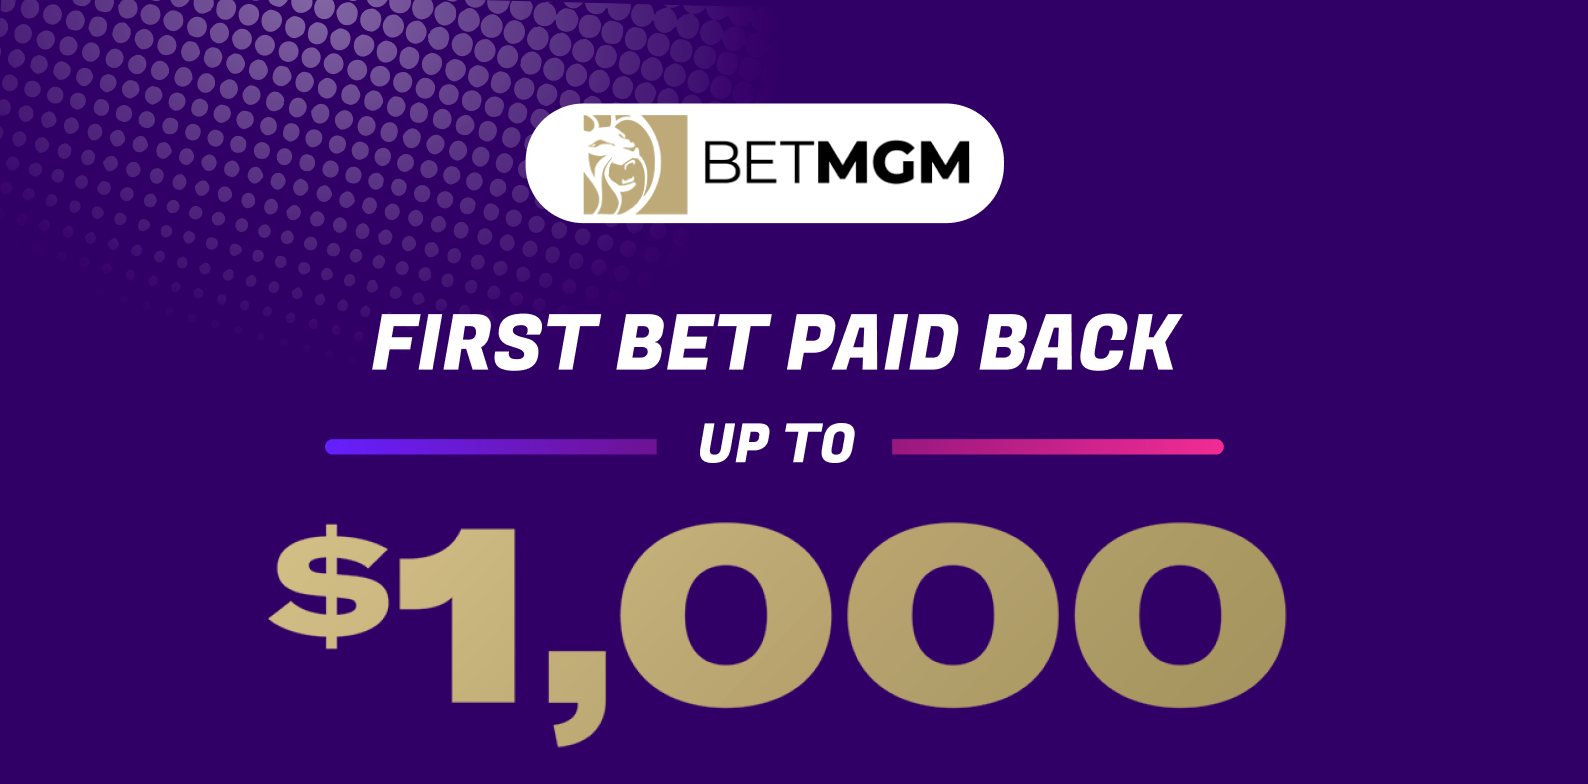 Profit Boost for all! Win any match, and your winnings will be